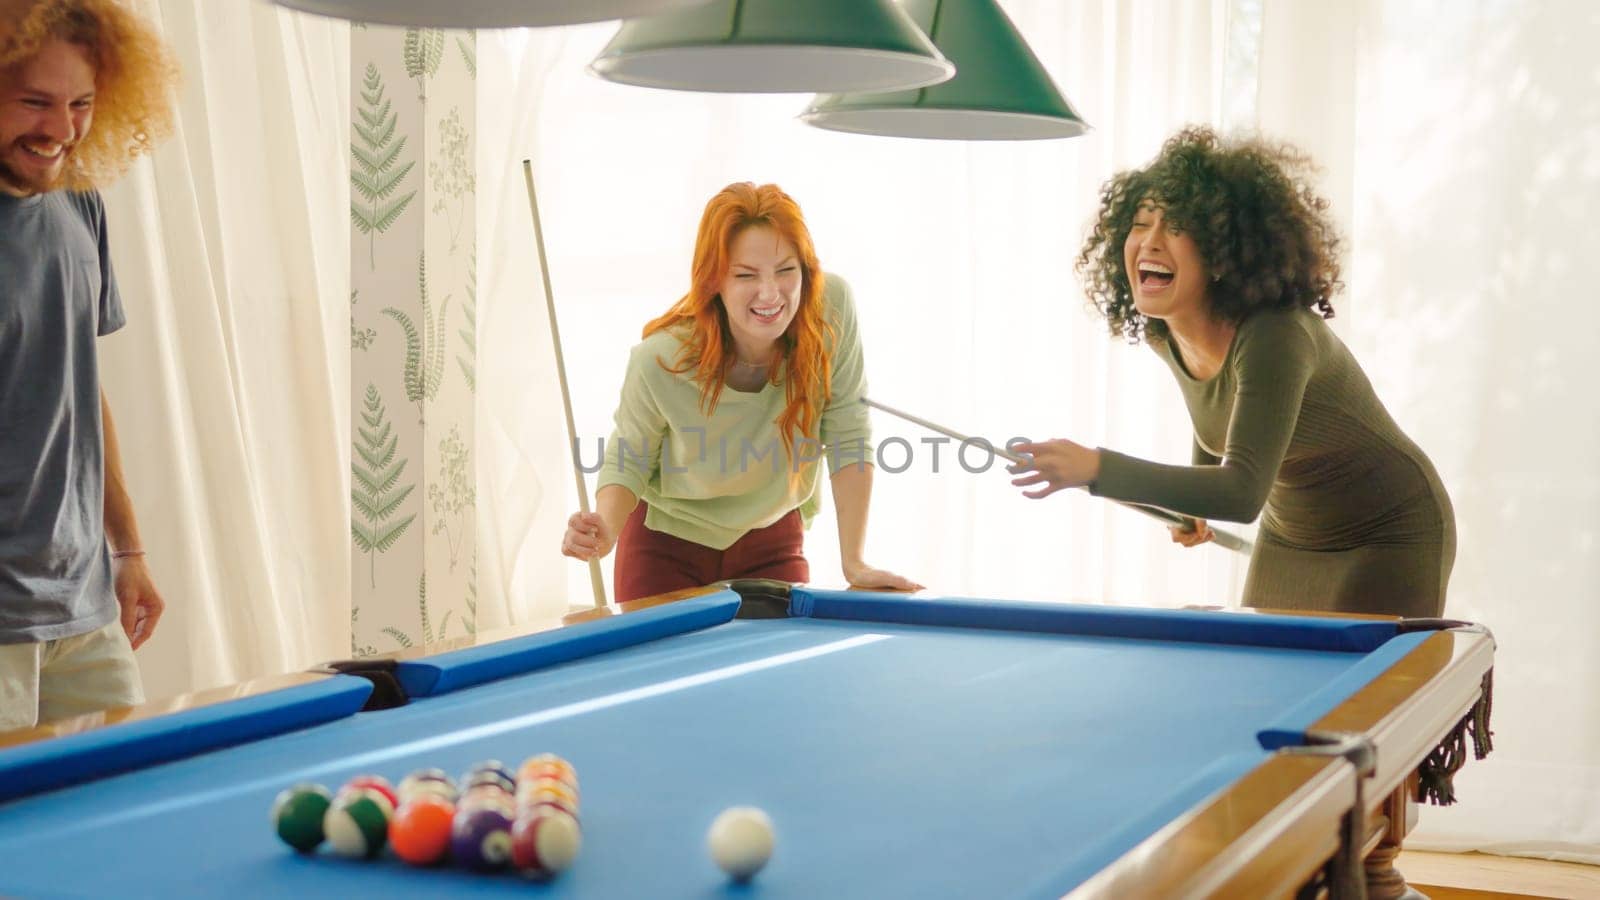 Friends laughing when woman playing awful at pool trying to hit the ball without luck